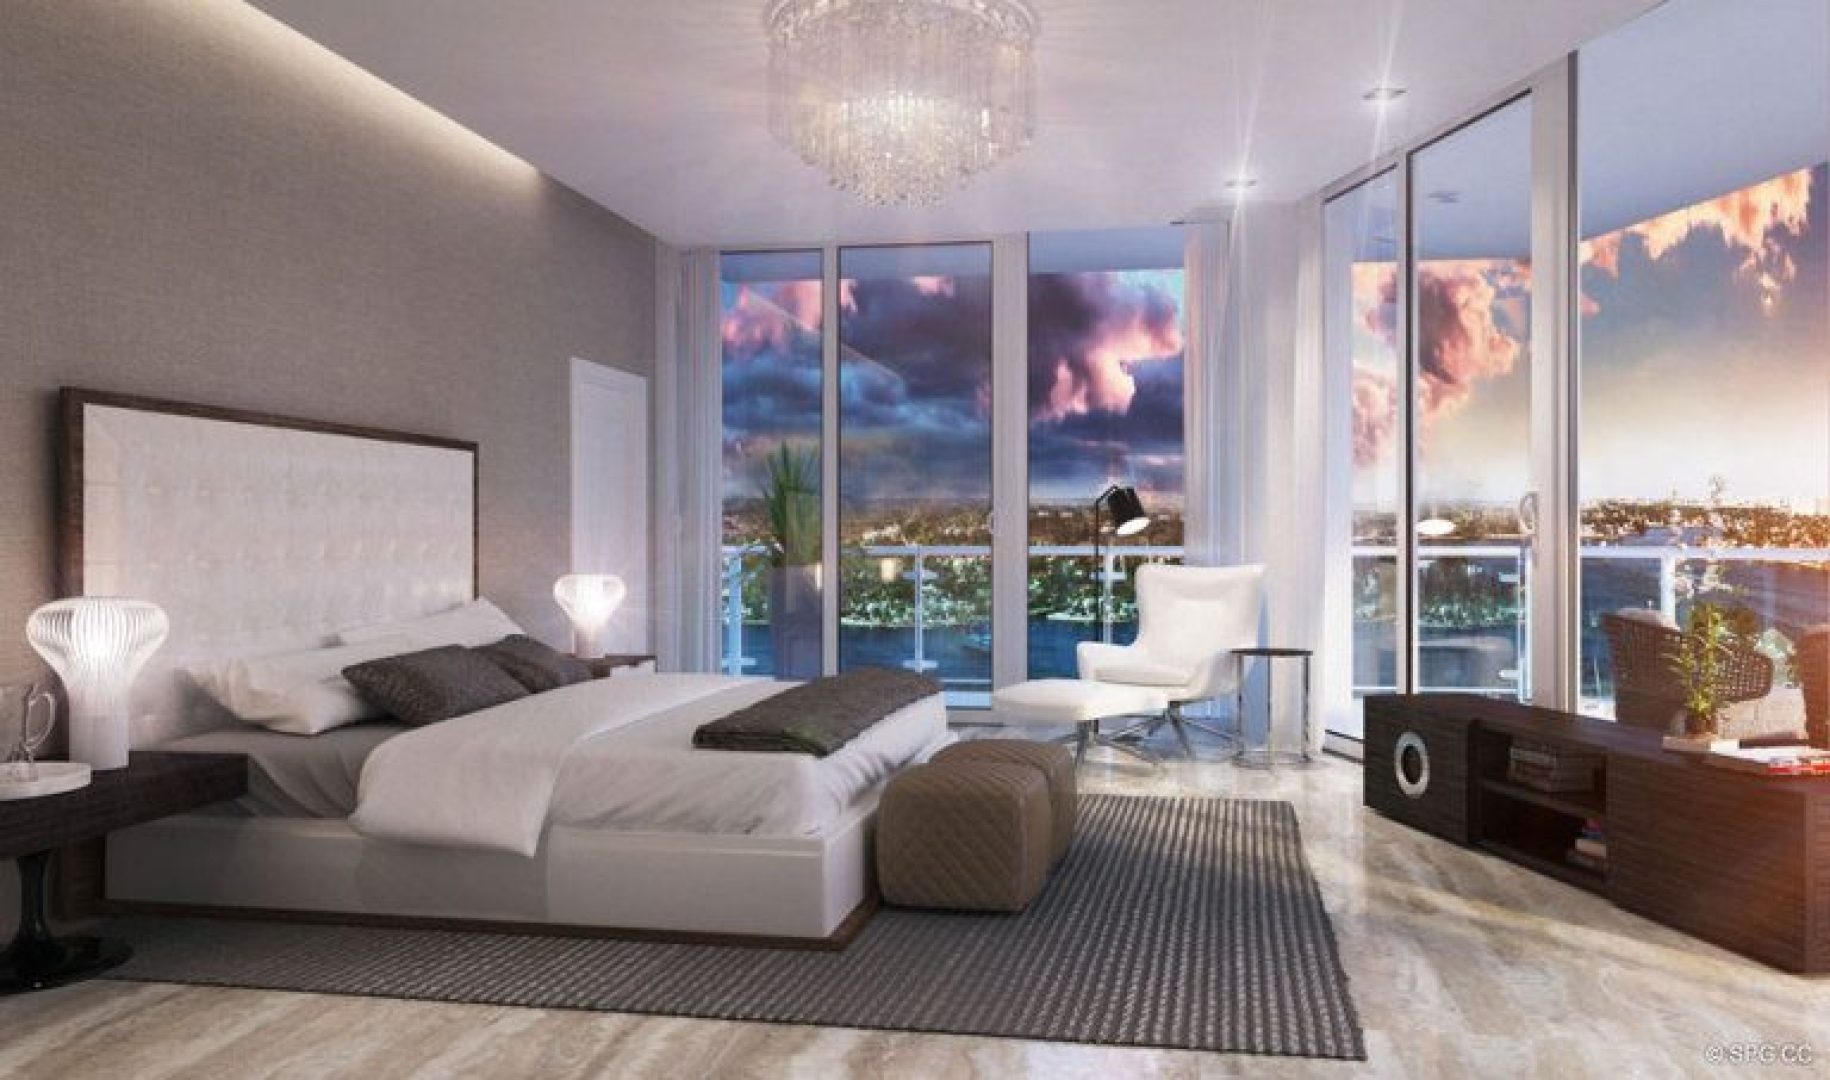 Bedroom Design at 33 Intracoastal, Luxury Waterfront Condominiums in Fort Lauderdale, Florida 33306